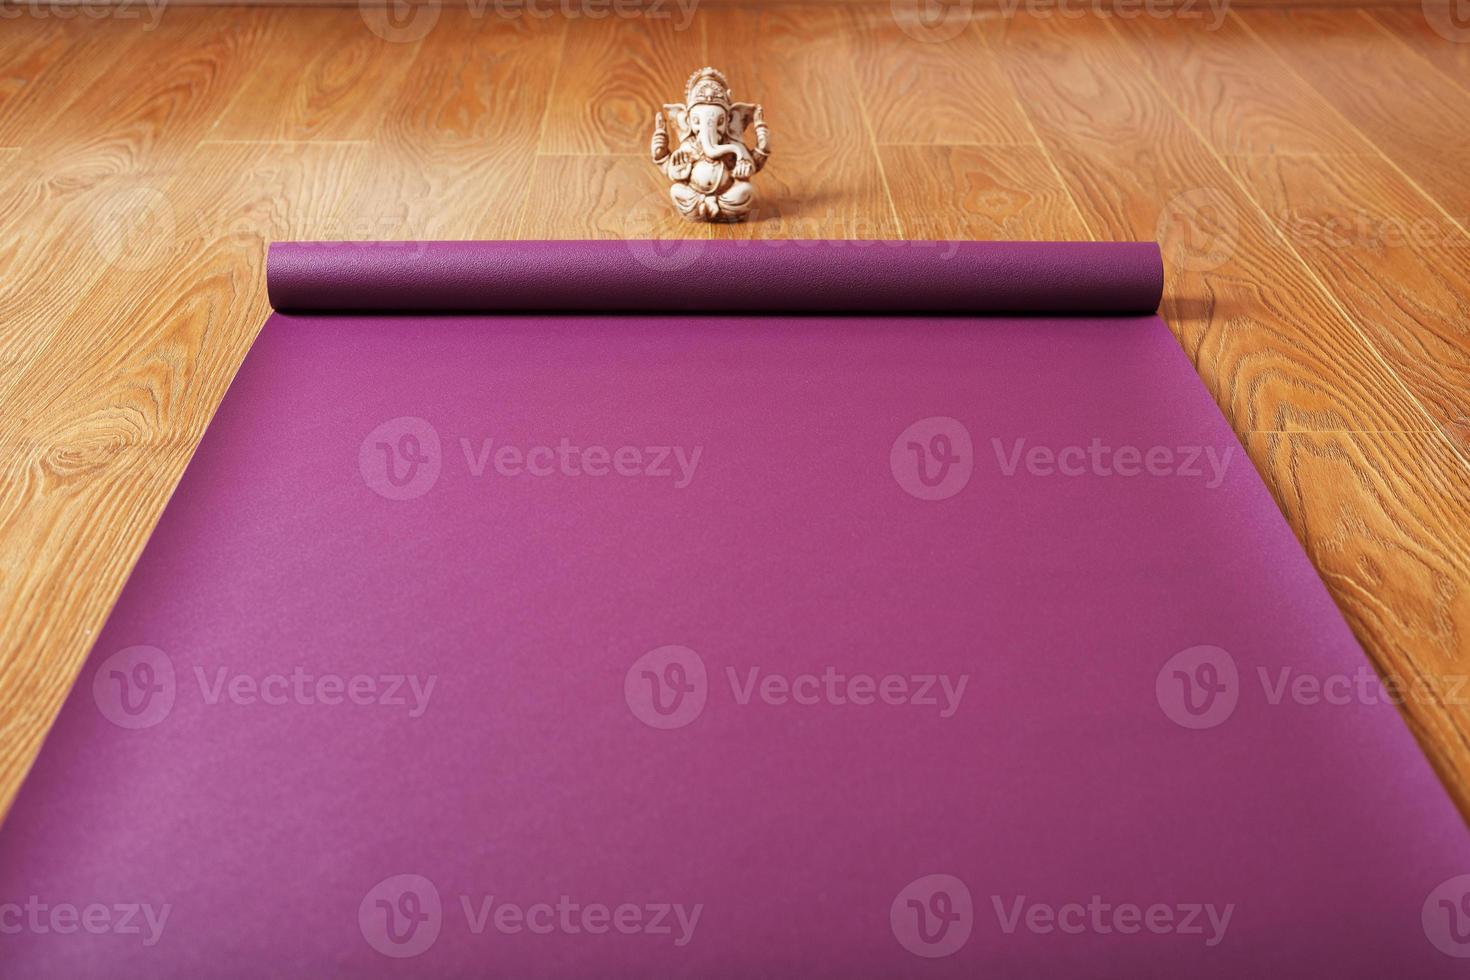 A lilac-colored yoga mat is spread out on the wooden floor with a Ganapati figurine photo